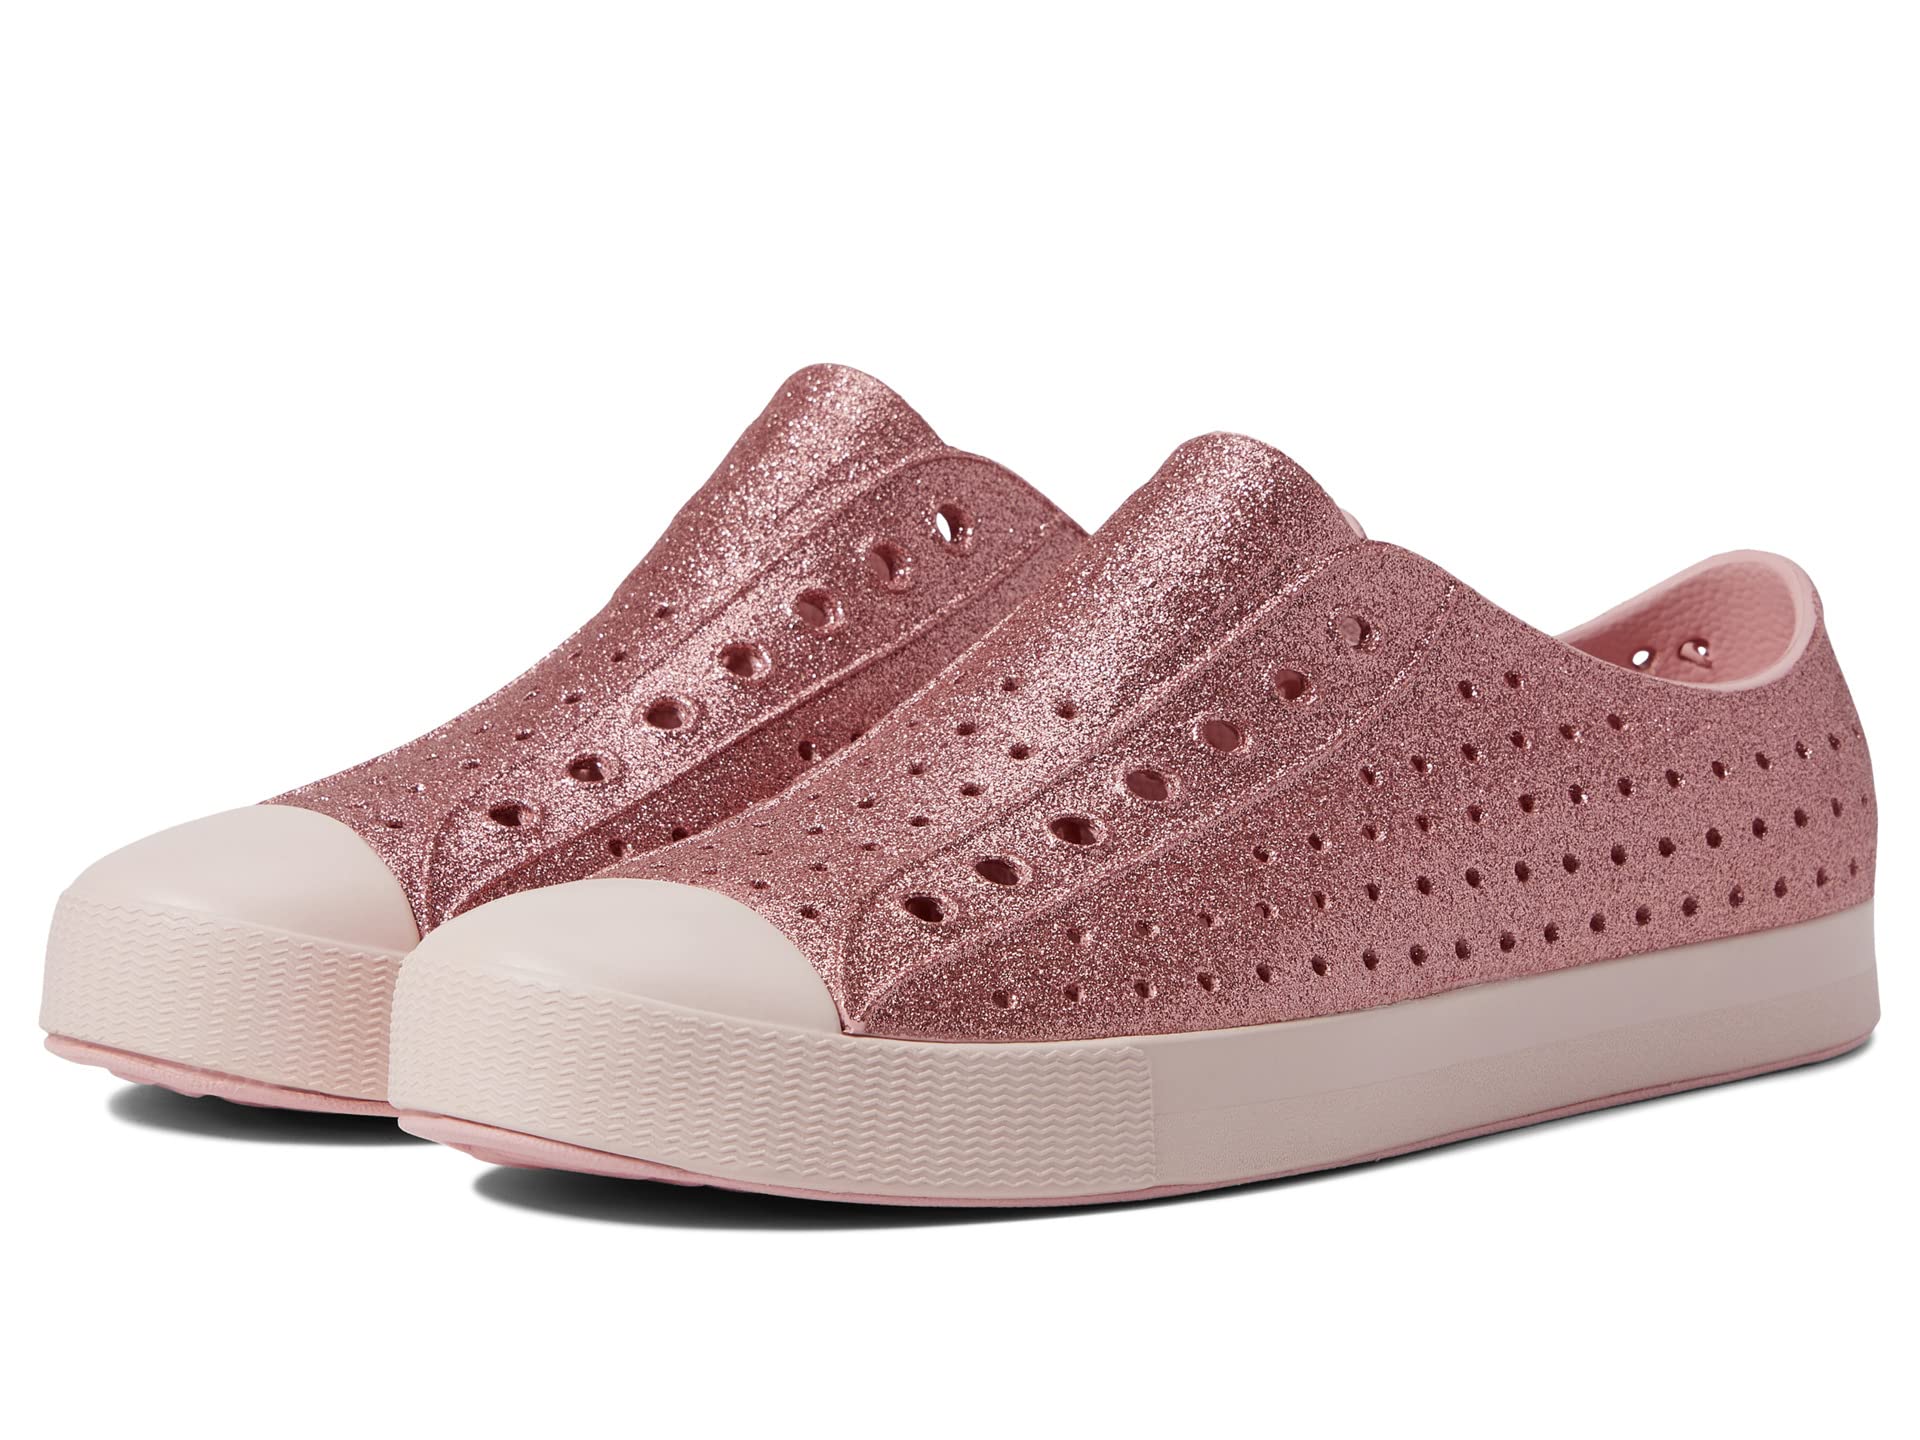 Кроссовки Native Shoes, Jefferson Bling кроссовки native shoes jefferson bling цвет rose pink bling dust pink